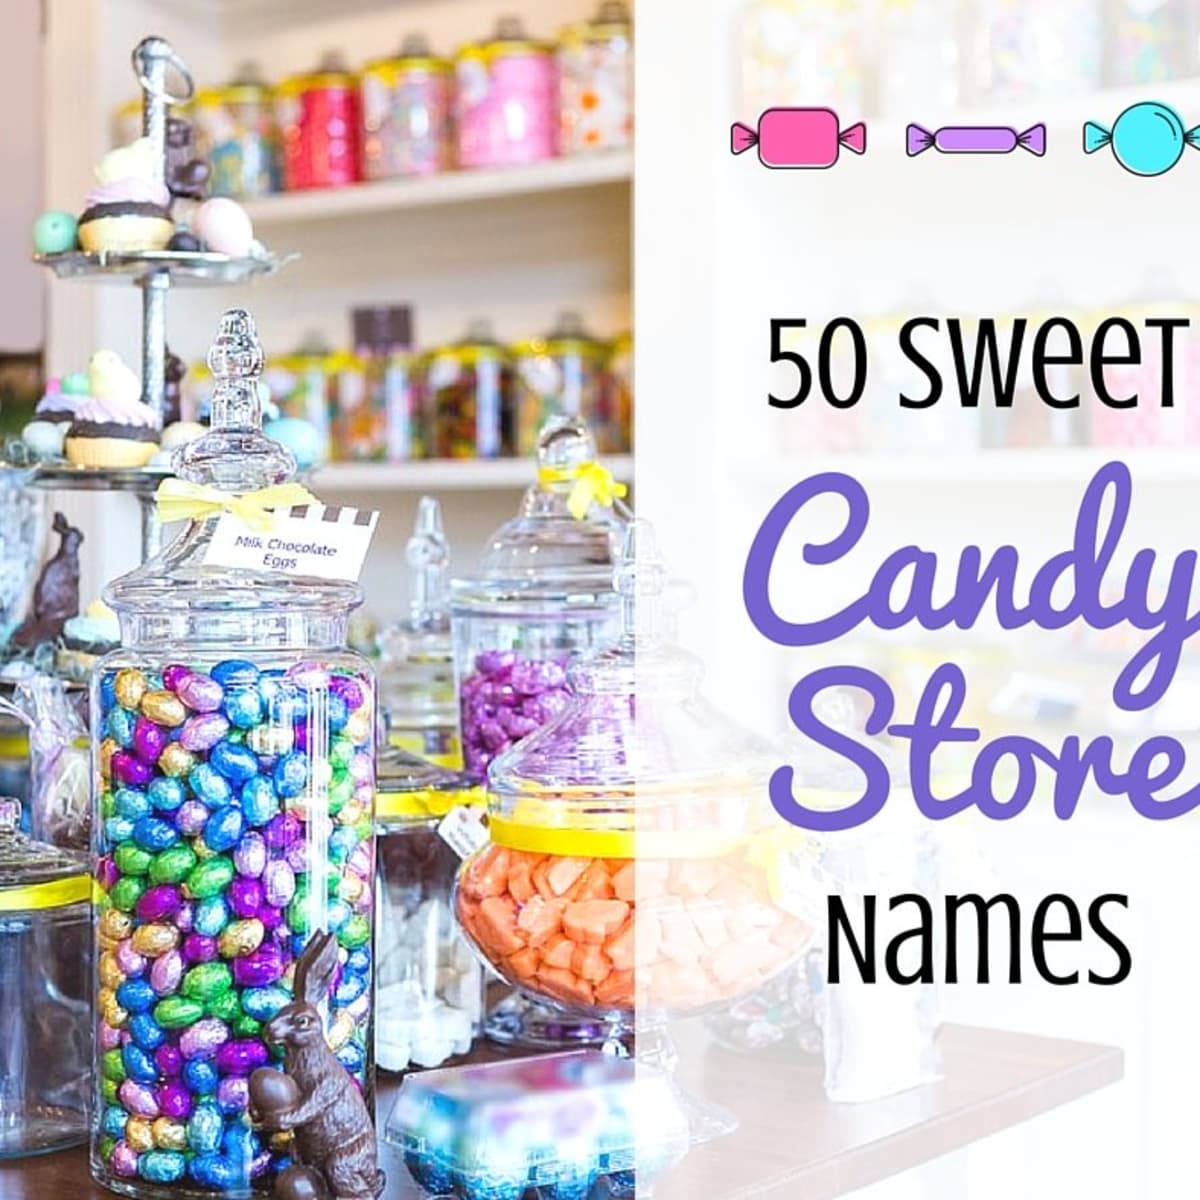 50 Sweet Candy Store Names - ToughNickel